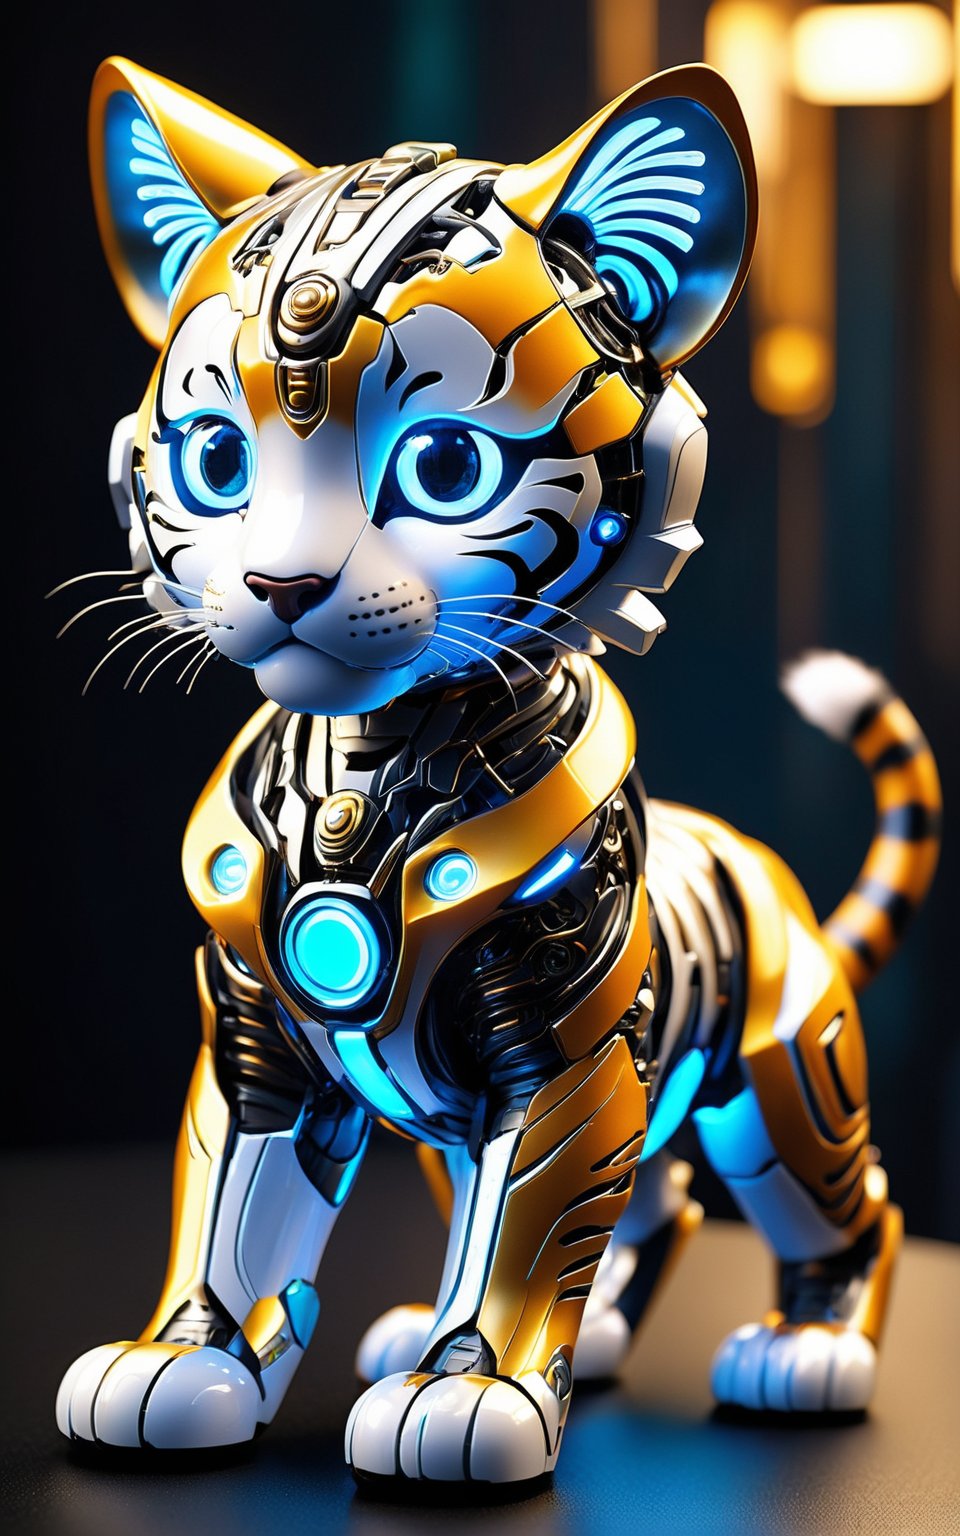 (cute and futuristic), envision a delightful cyborg tiger cub with neon-glowing mechanical enhancements. Picture the adorable feline with sleek, metallic body parts intricately integrated with its furry form, emitting a soft neon glow that illuminates its surroundings. The tiger's playful demeanor is accentuated by its cybernetic features, blending the innocence of youth with the marvels of advanced technology. Imagine the tiny cub exploring its surroundings with curiosity, its luminous body parts adding a touch of futuristic charm to its appearance. This concept demands attention to detail in rendering the seamless fusion of organic and mechanical elements, creating a captivating portrayal of a cybernetic creature. Transport the viewer to a world where nature and technology harmonize in perfect synergy, offering a glimpse into a future where even the wildest beasts are touched by the wonders of science and innovation.
